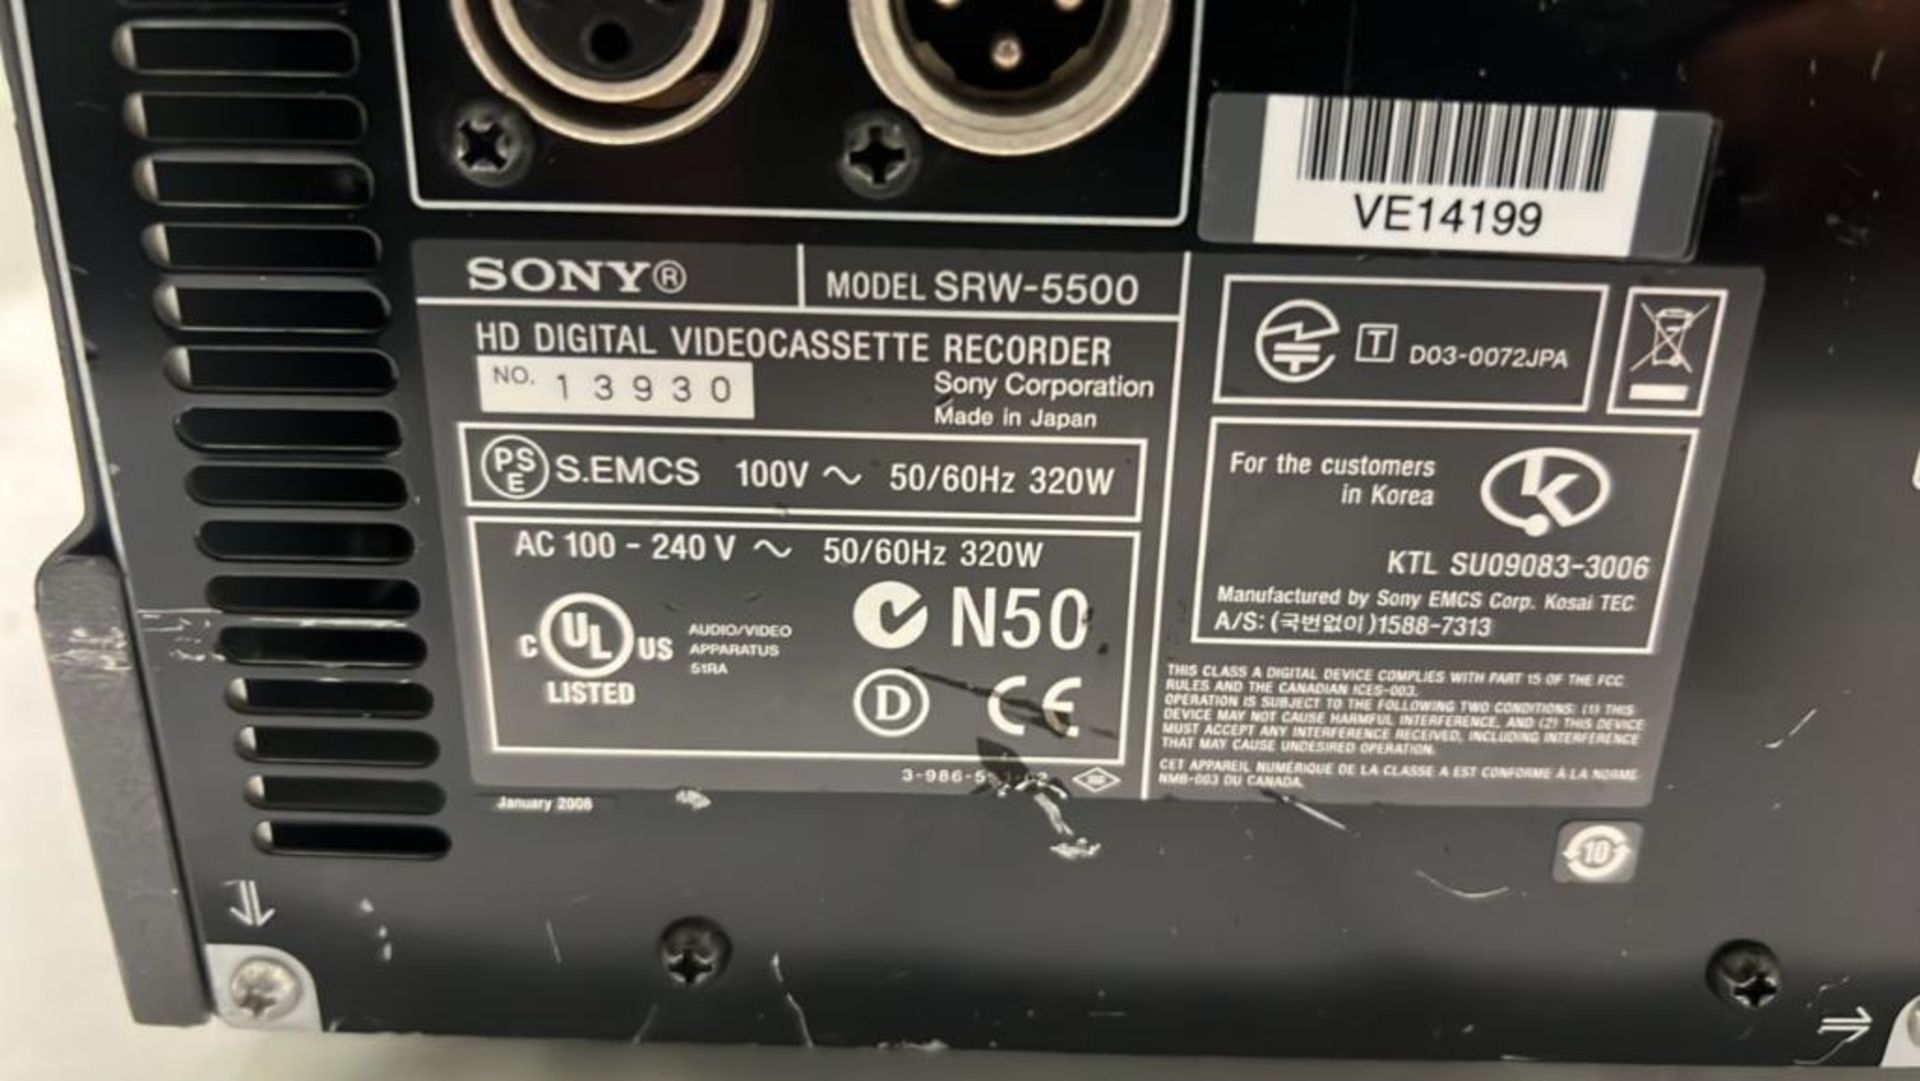 Sony SRW-5500 Digital Videocassette recorder with flight case SN :13930 - Image 5 of 6